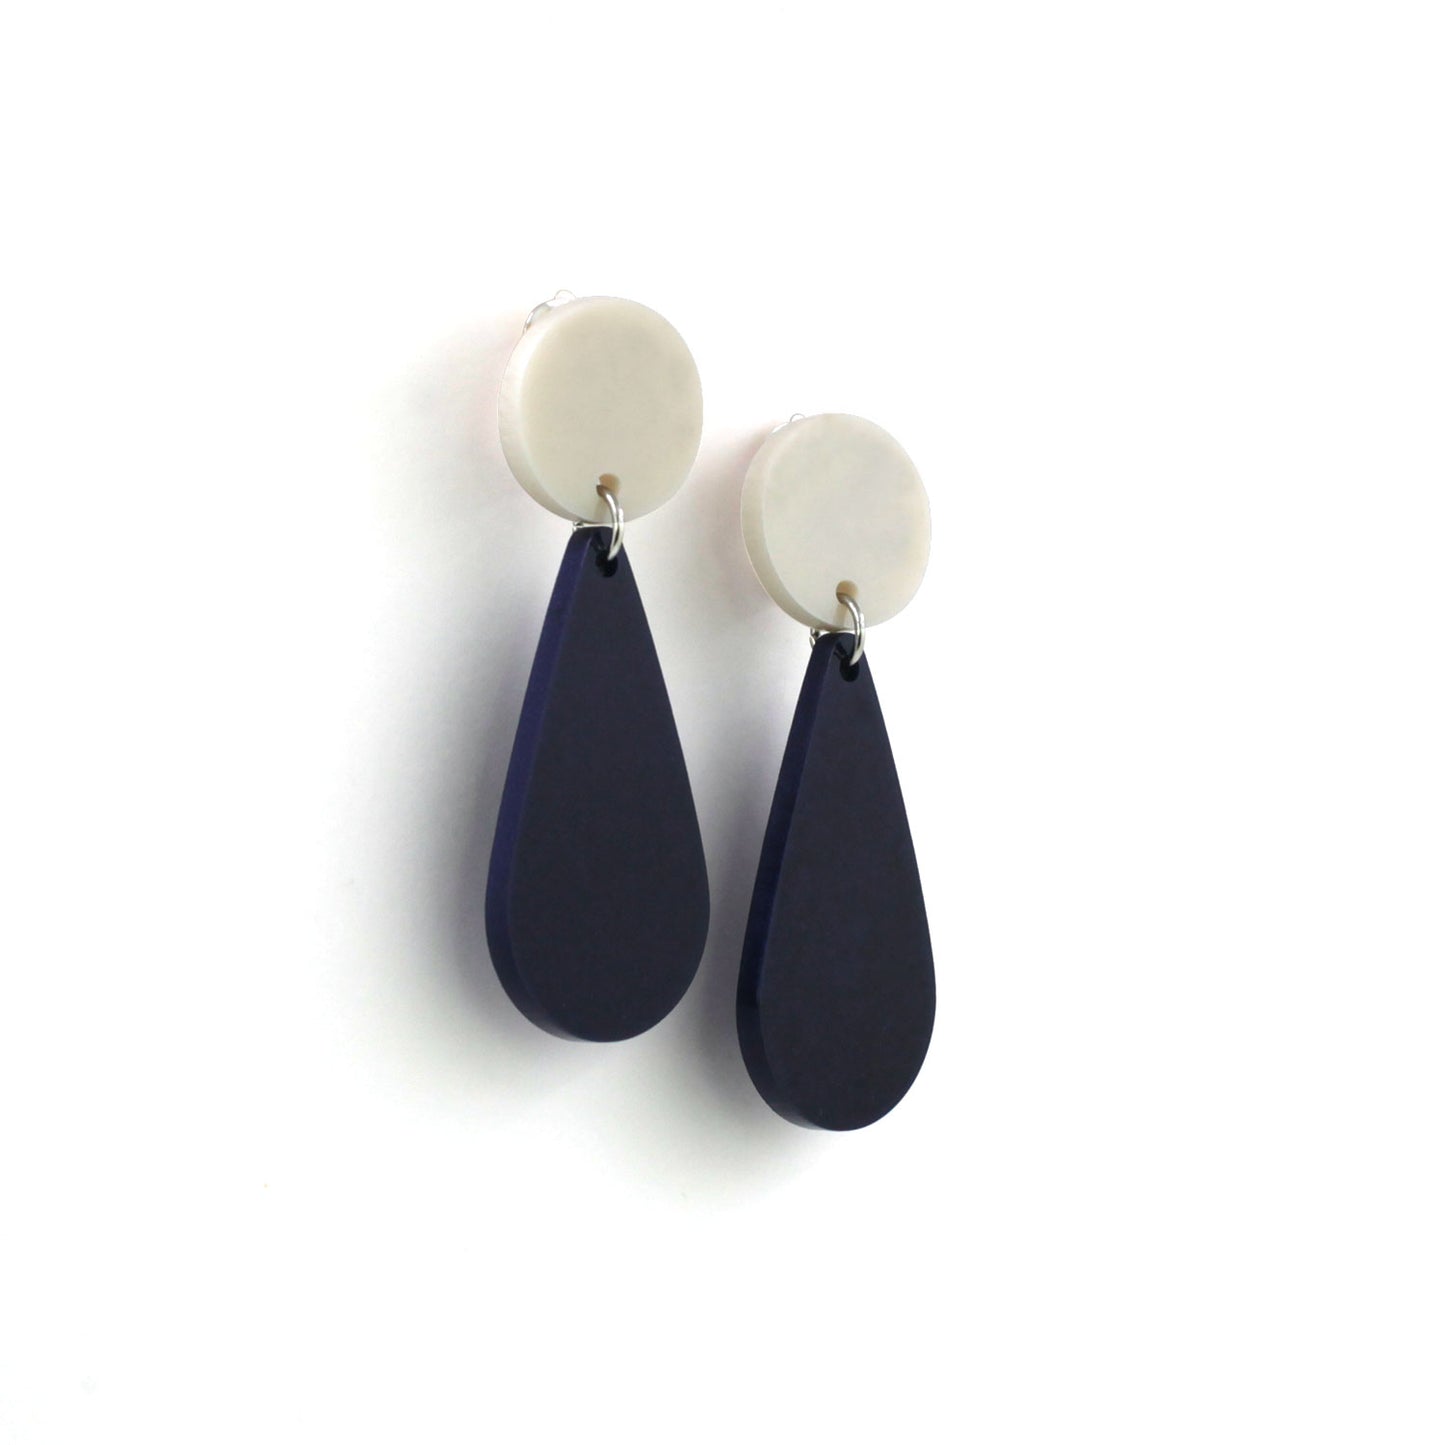 This is a picture of a teardrop dangle earrings on a white background. the top of the earrings is a white dot and the teardrops are navy blue